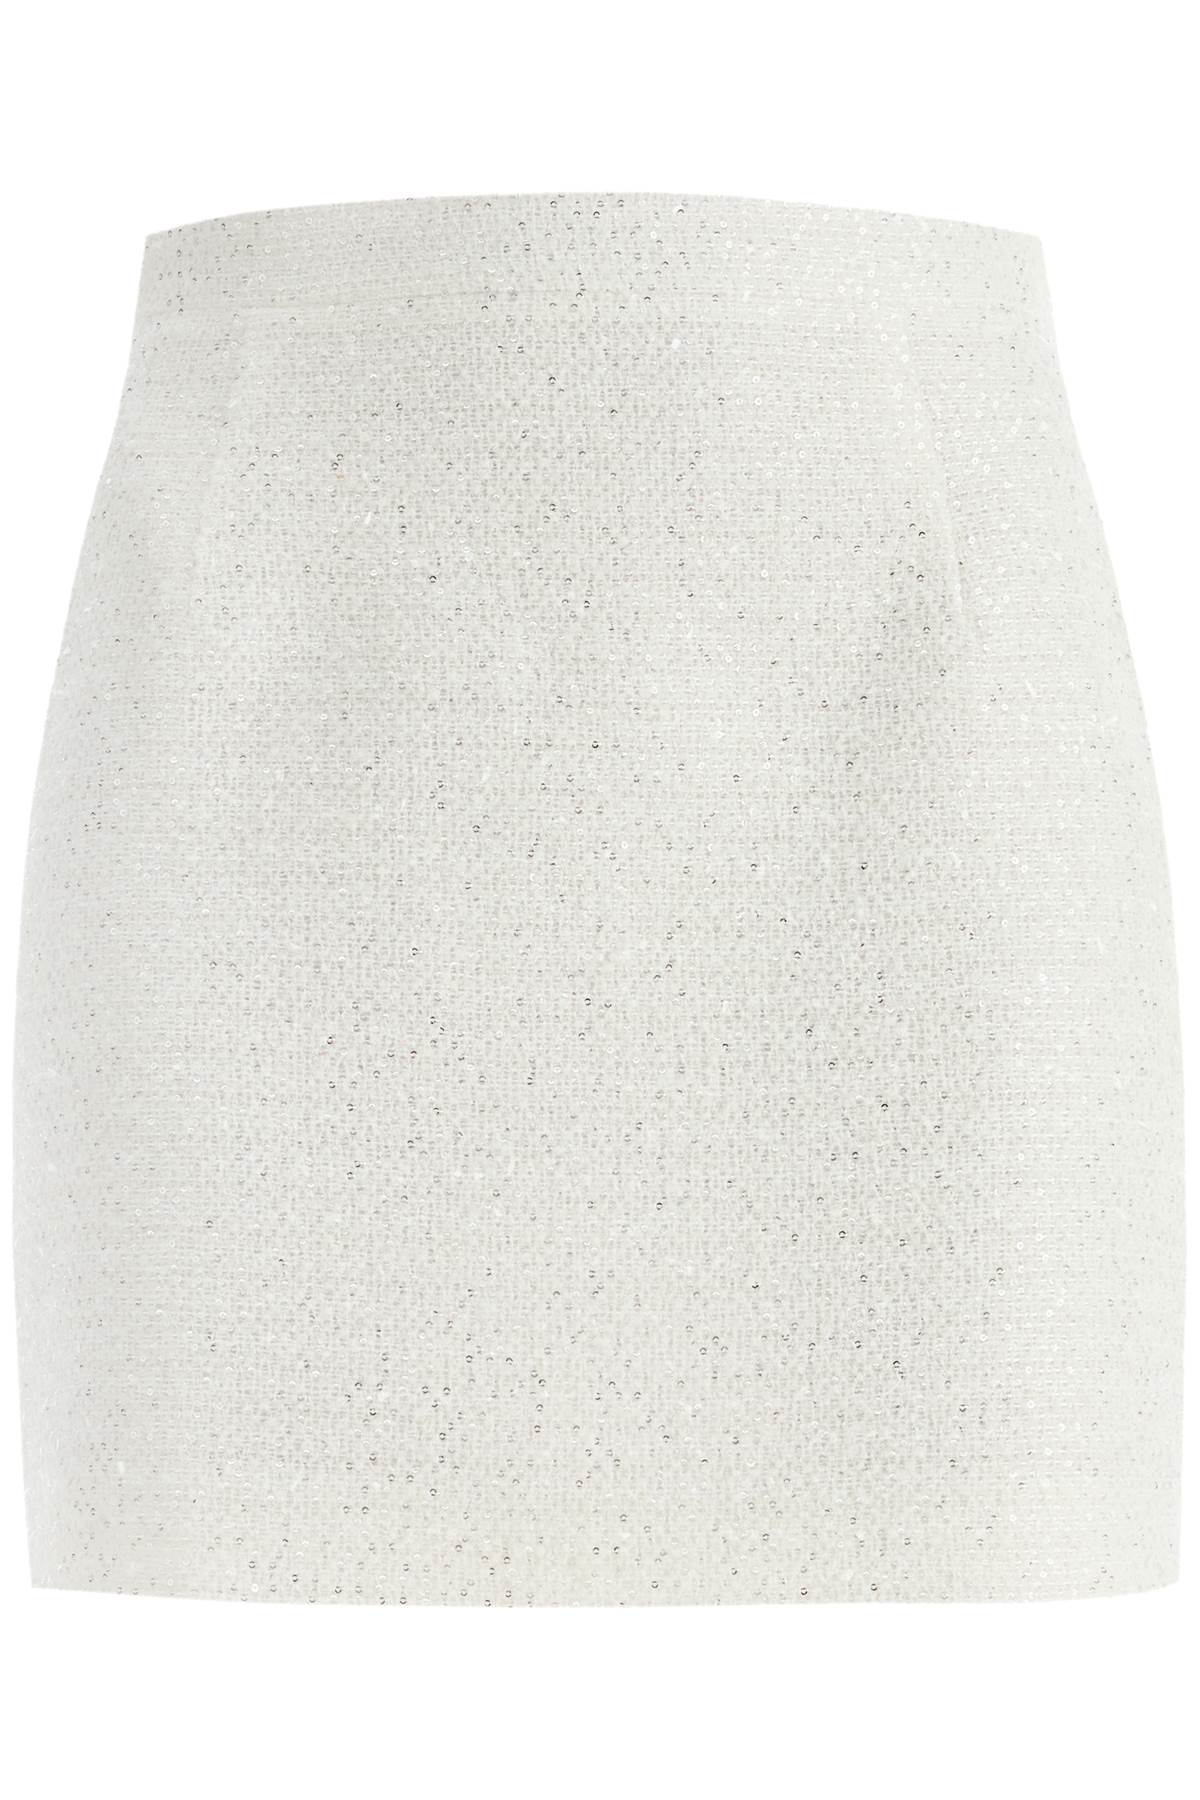 Alessandra Rich Tweed Mini Skirt With Sequins   White